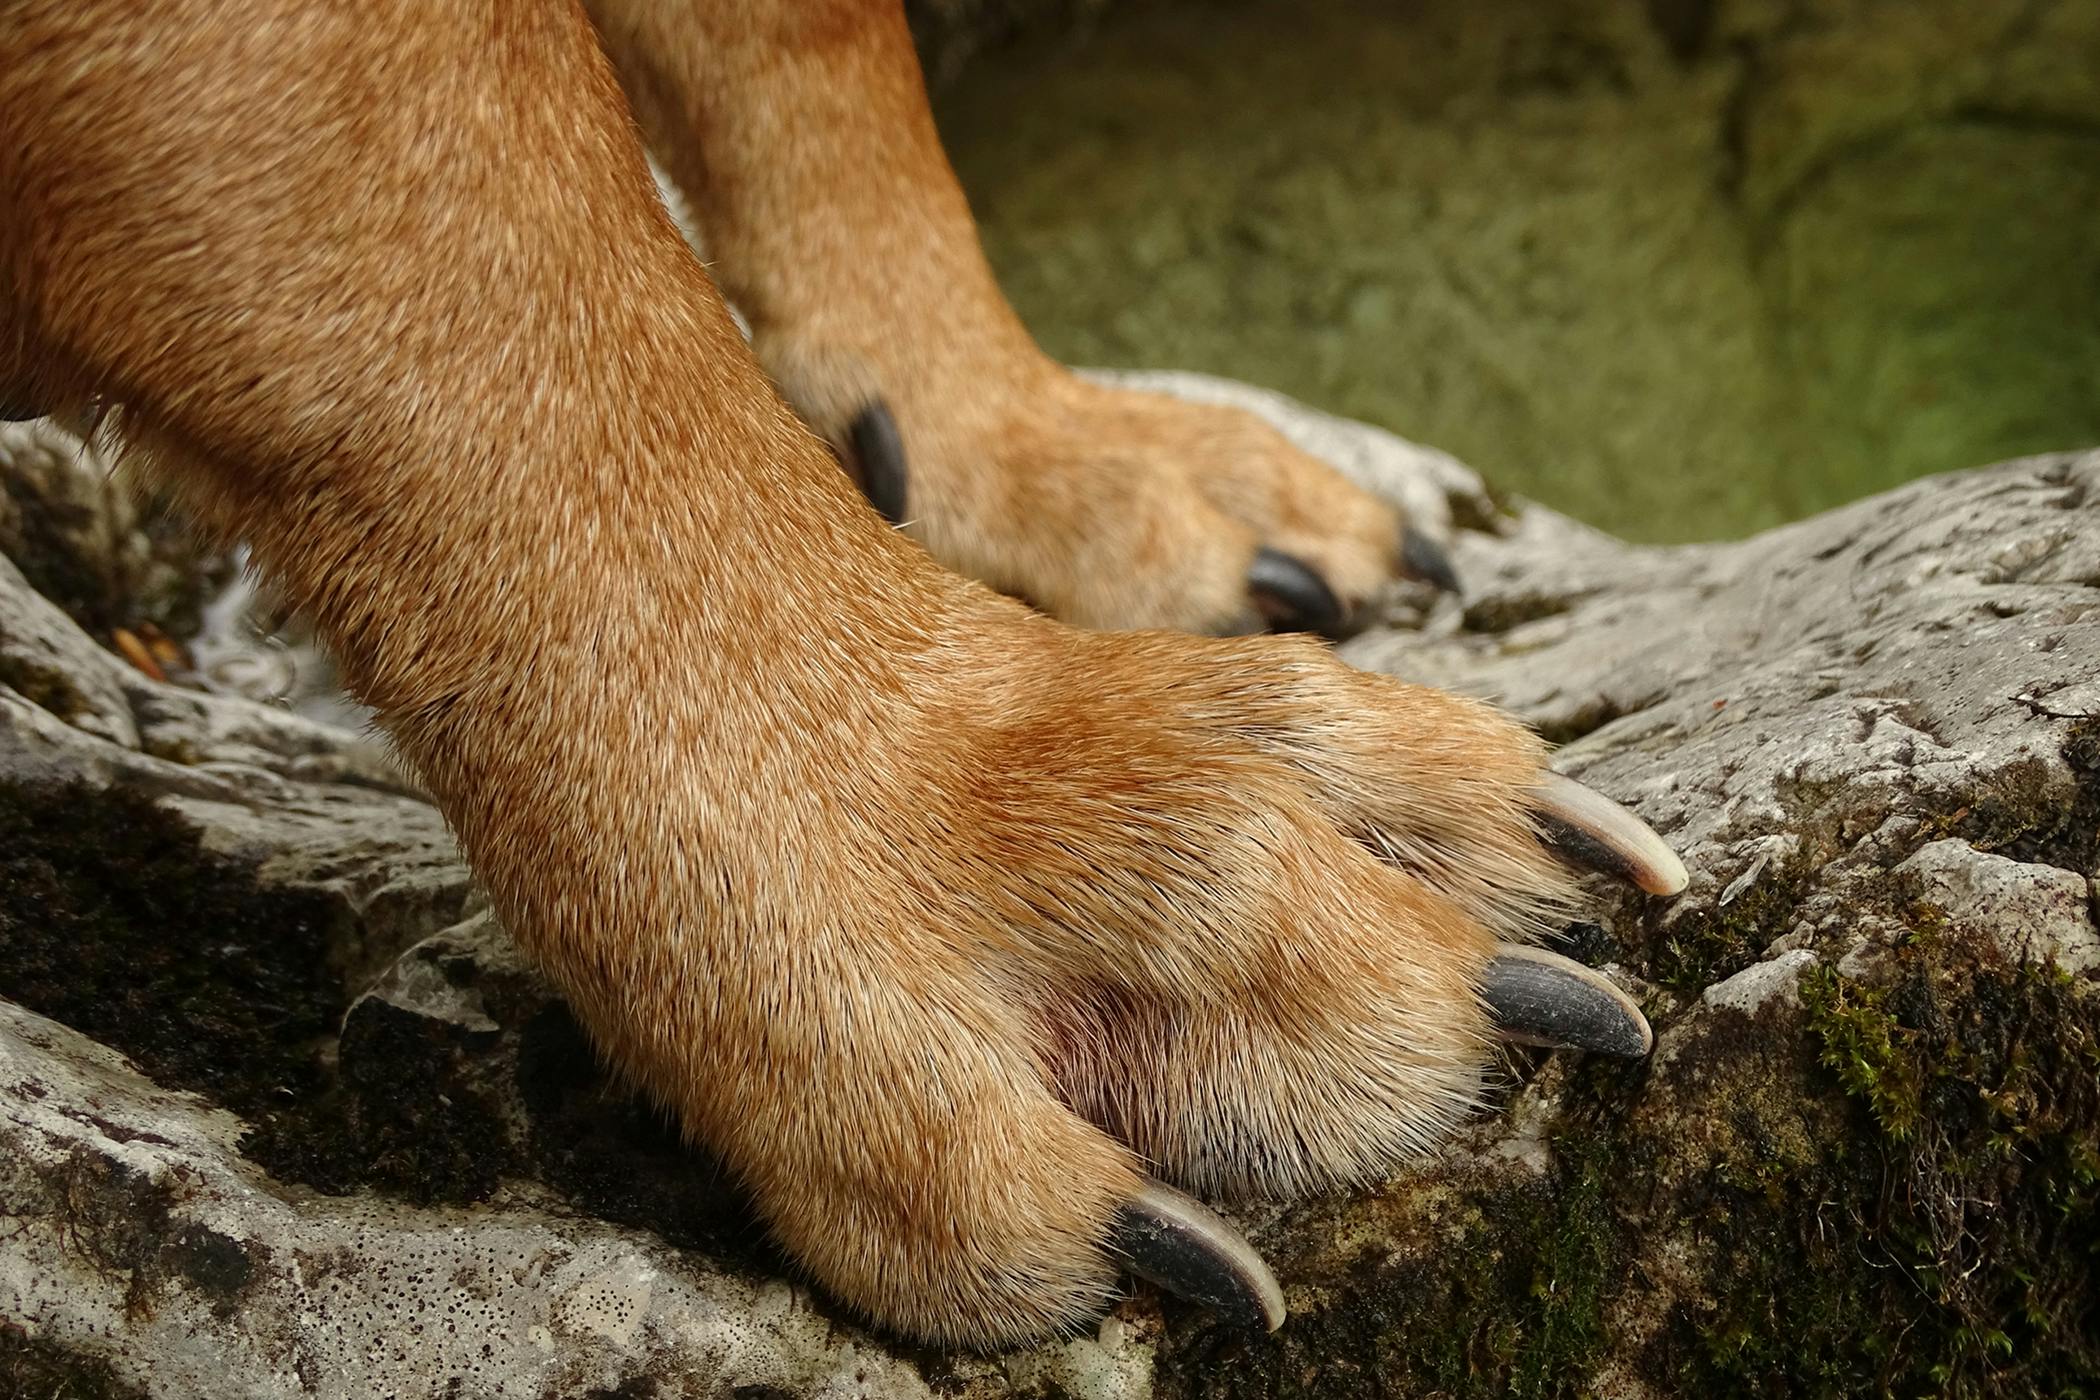 polydactyly-in-dogs-symptoms-causes-diagnosis-treatment-recovery